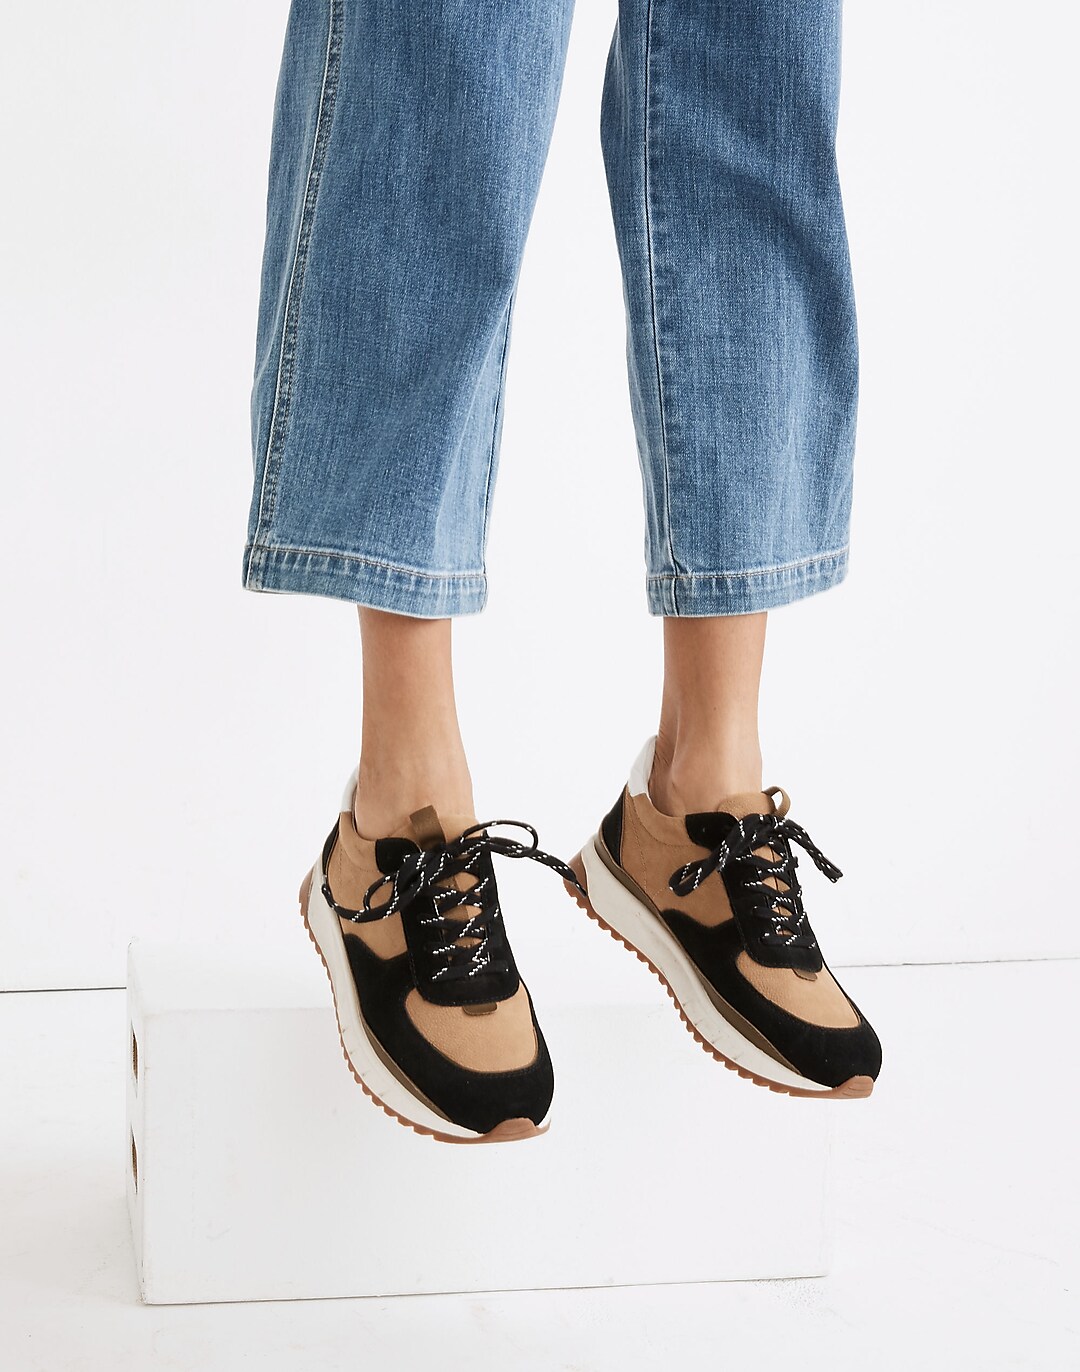 Madewell Kickoff Trainer Sneakers